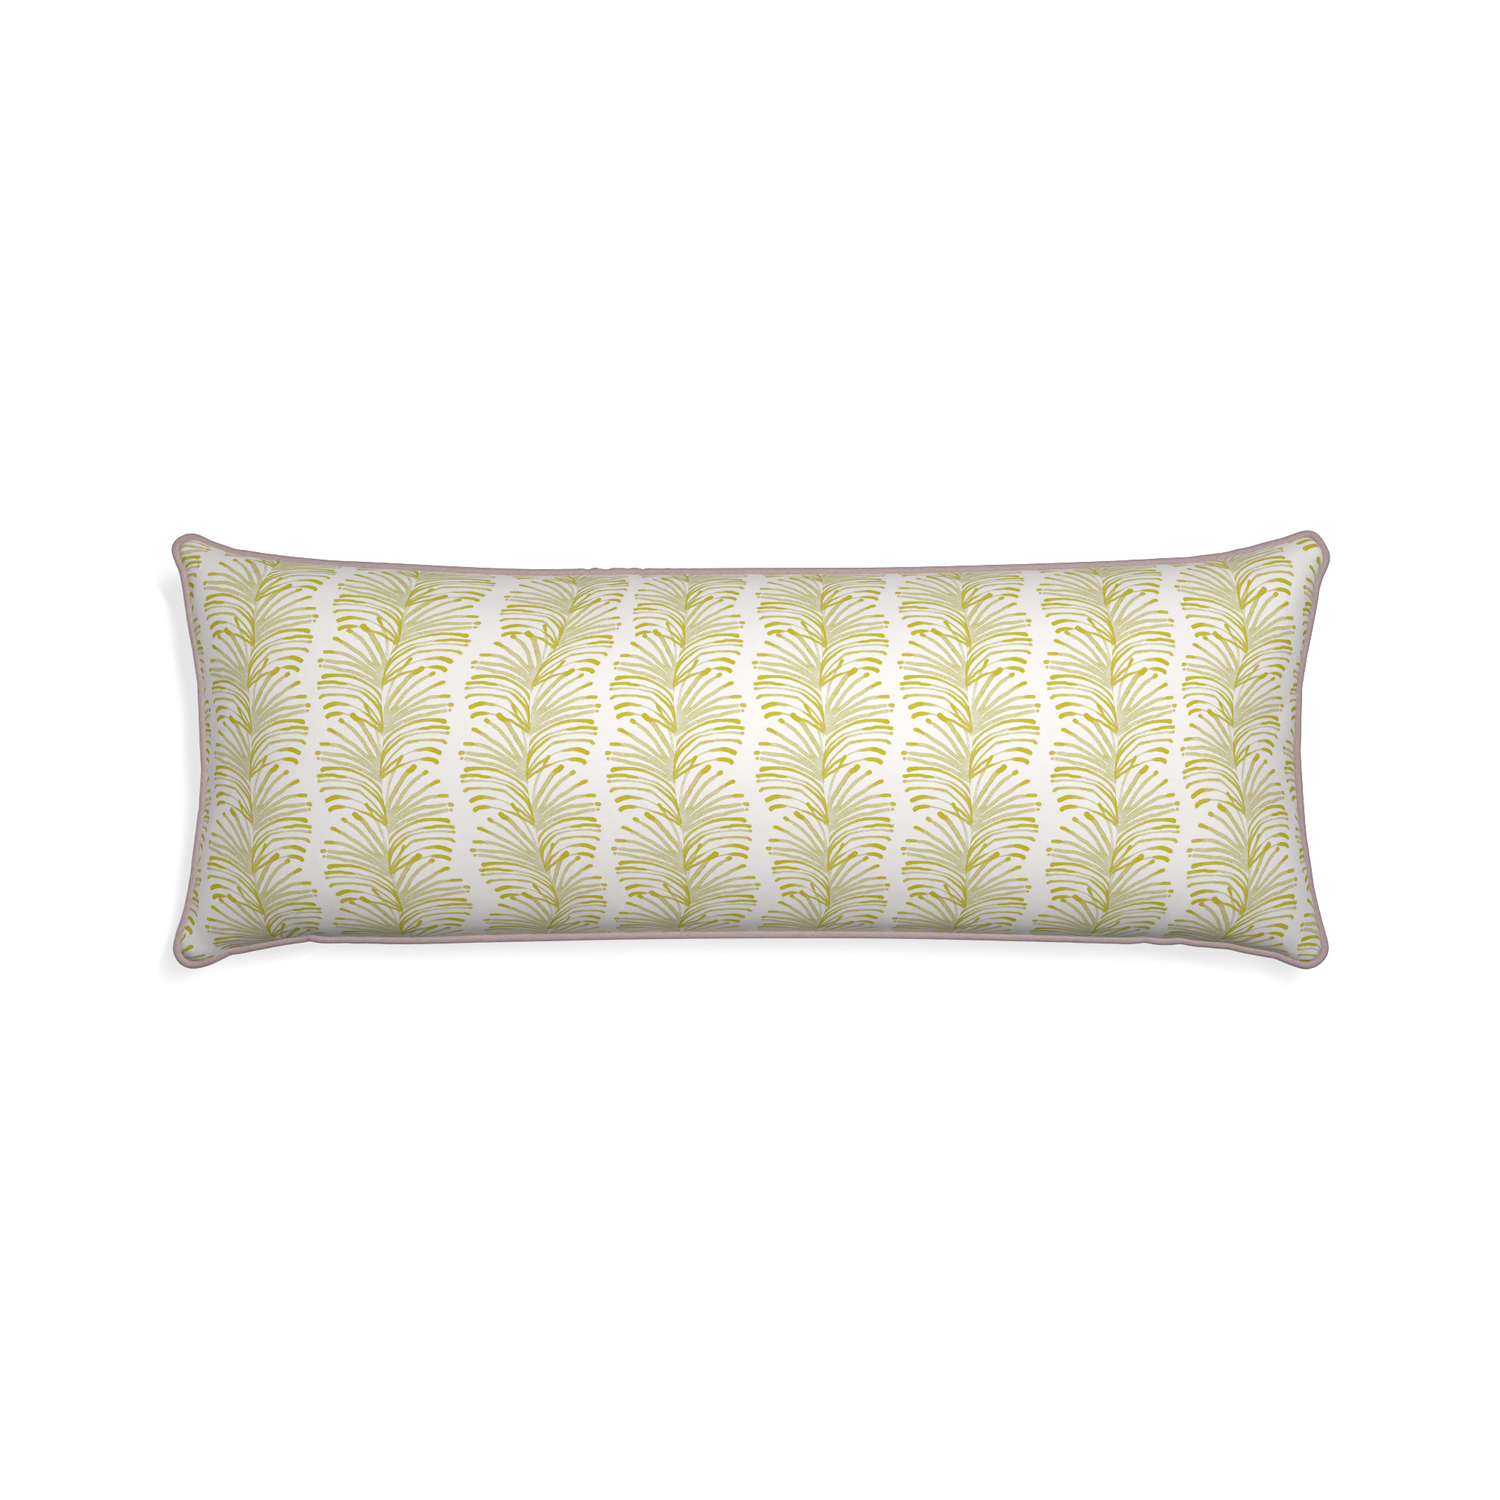 Xl-lumbar emma chartreuse custom yellow stripe chartreusepillow with orchid piping on white background